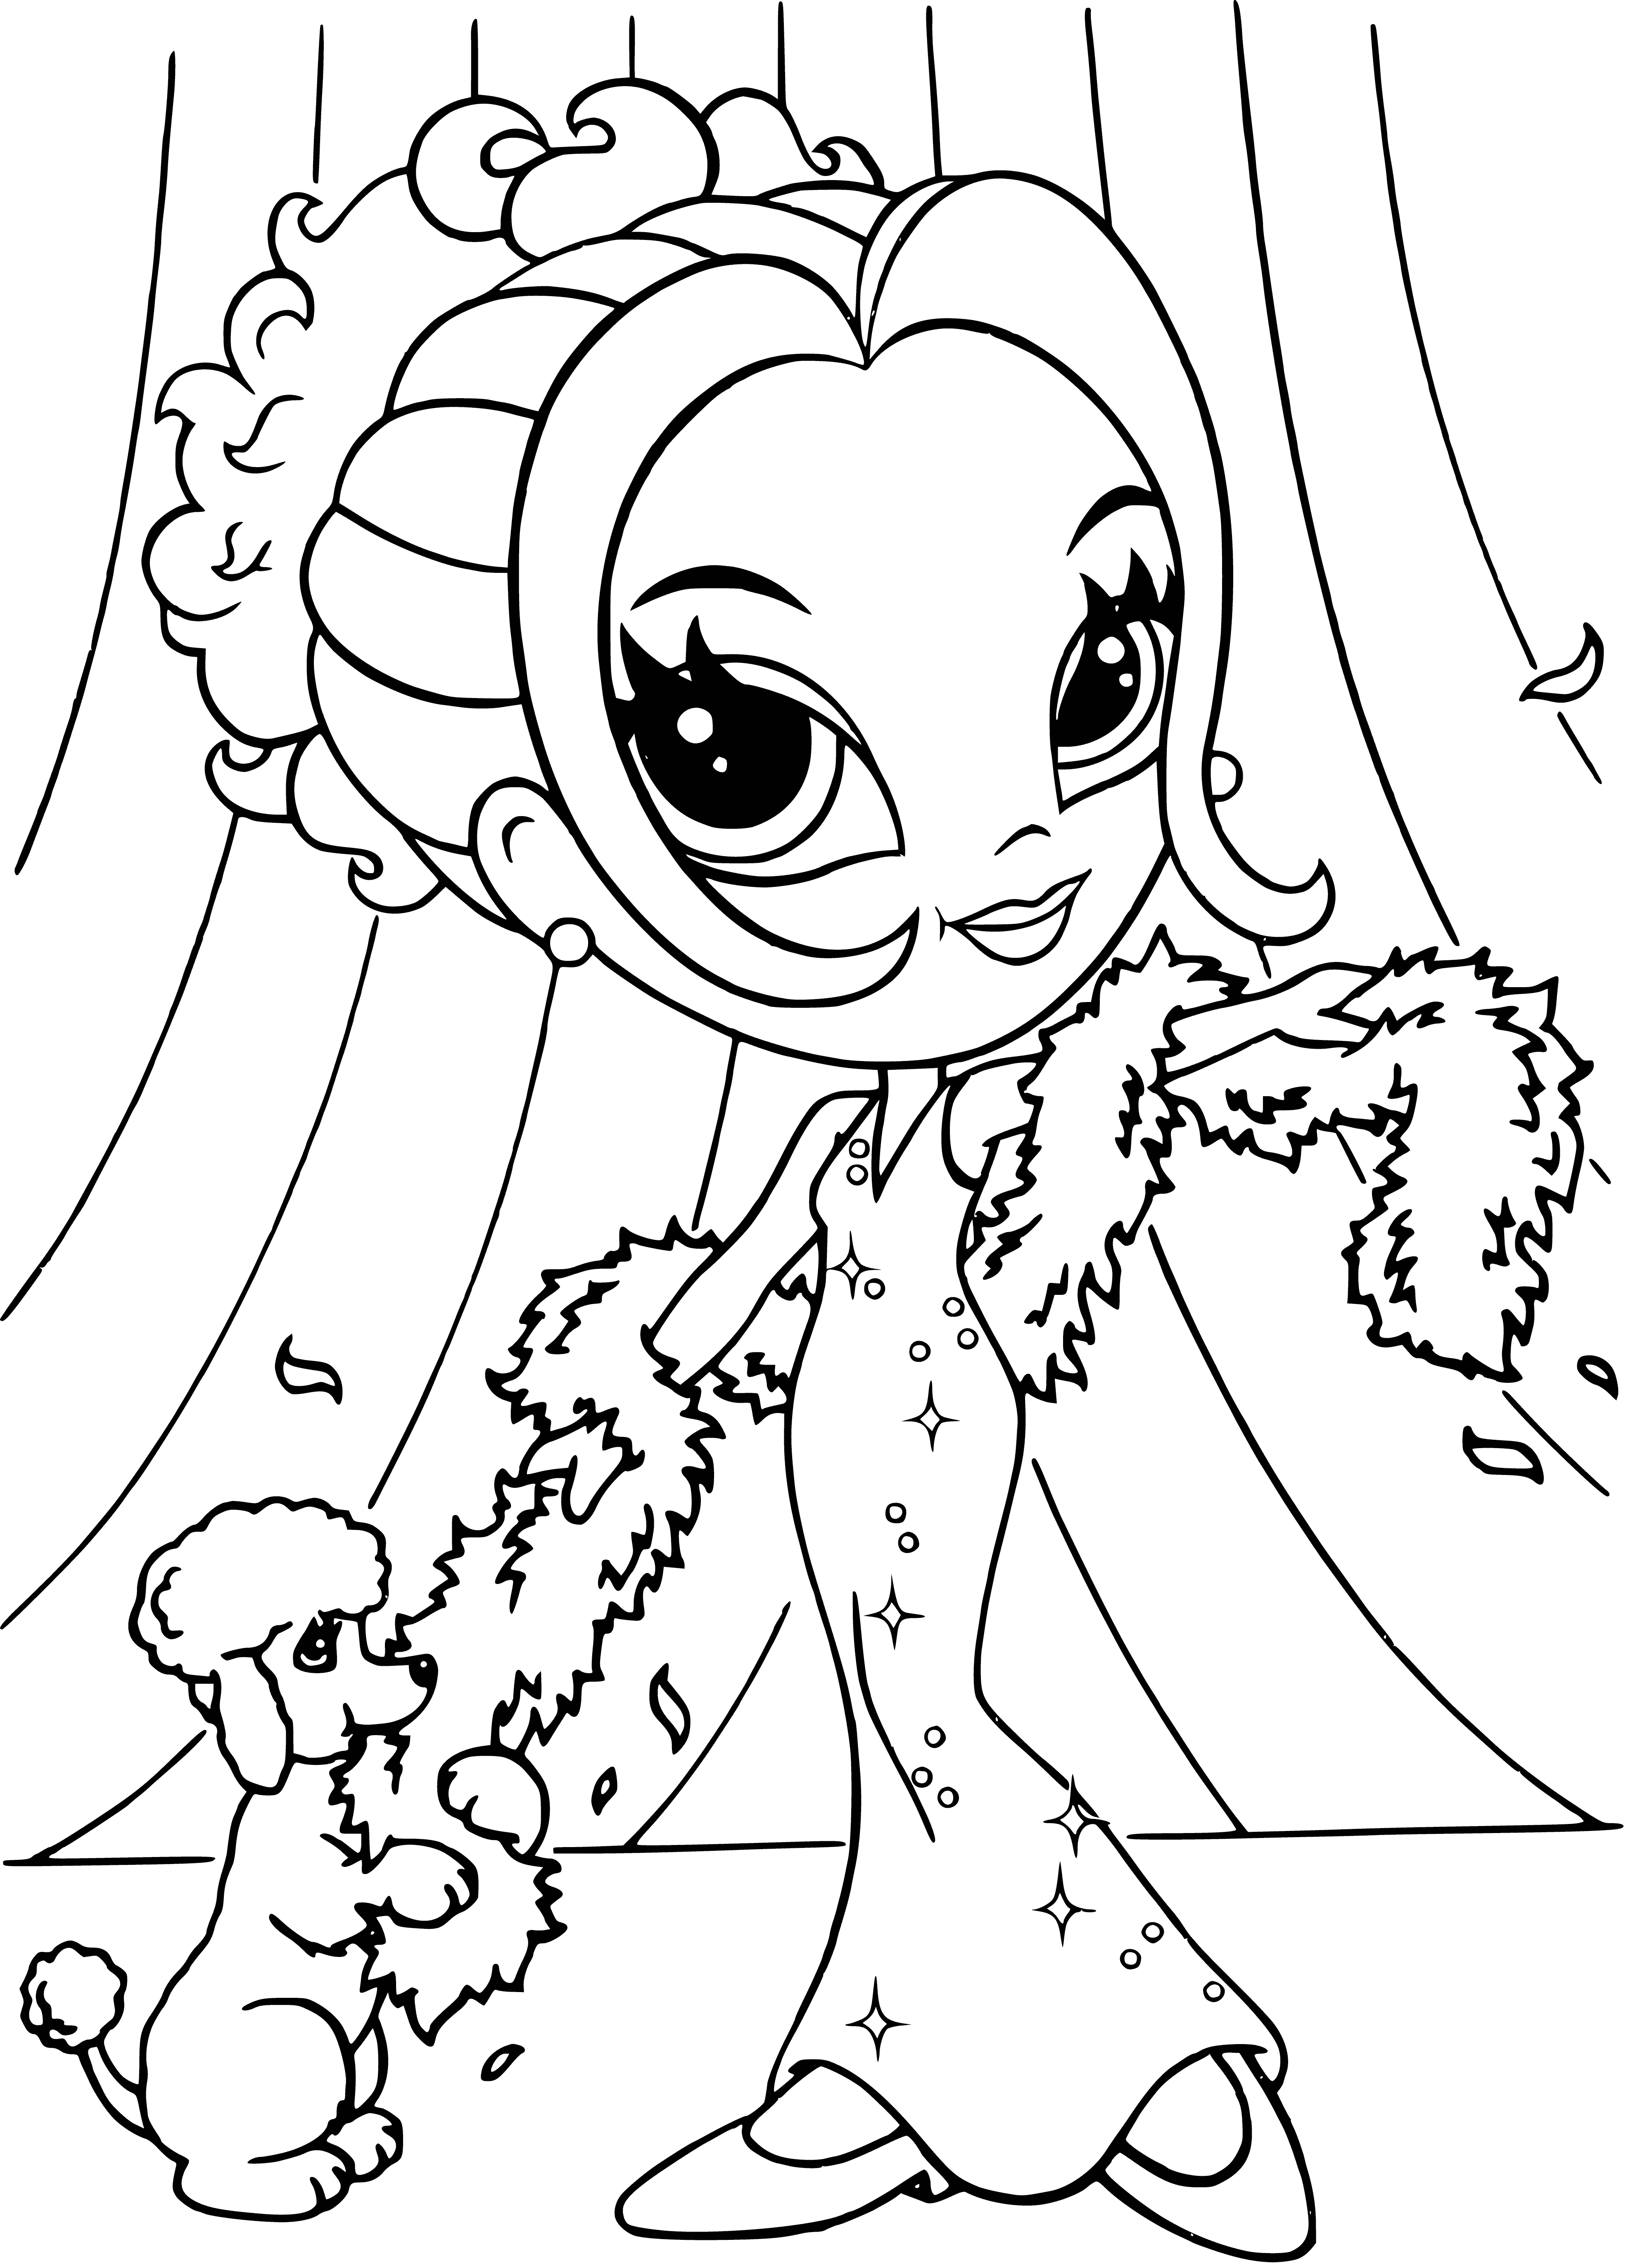 coloring page: Woman in pink robe admiring her full face of makeup in mirror; holding perfume bottle and brush, her hair styled in loose curls. #gettingready